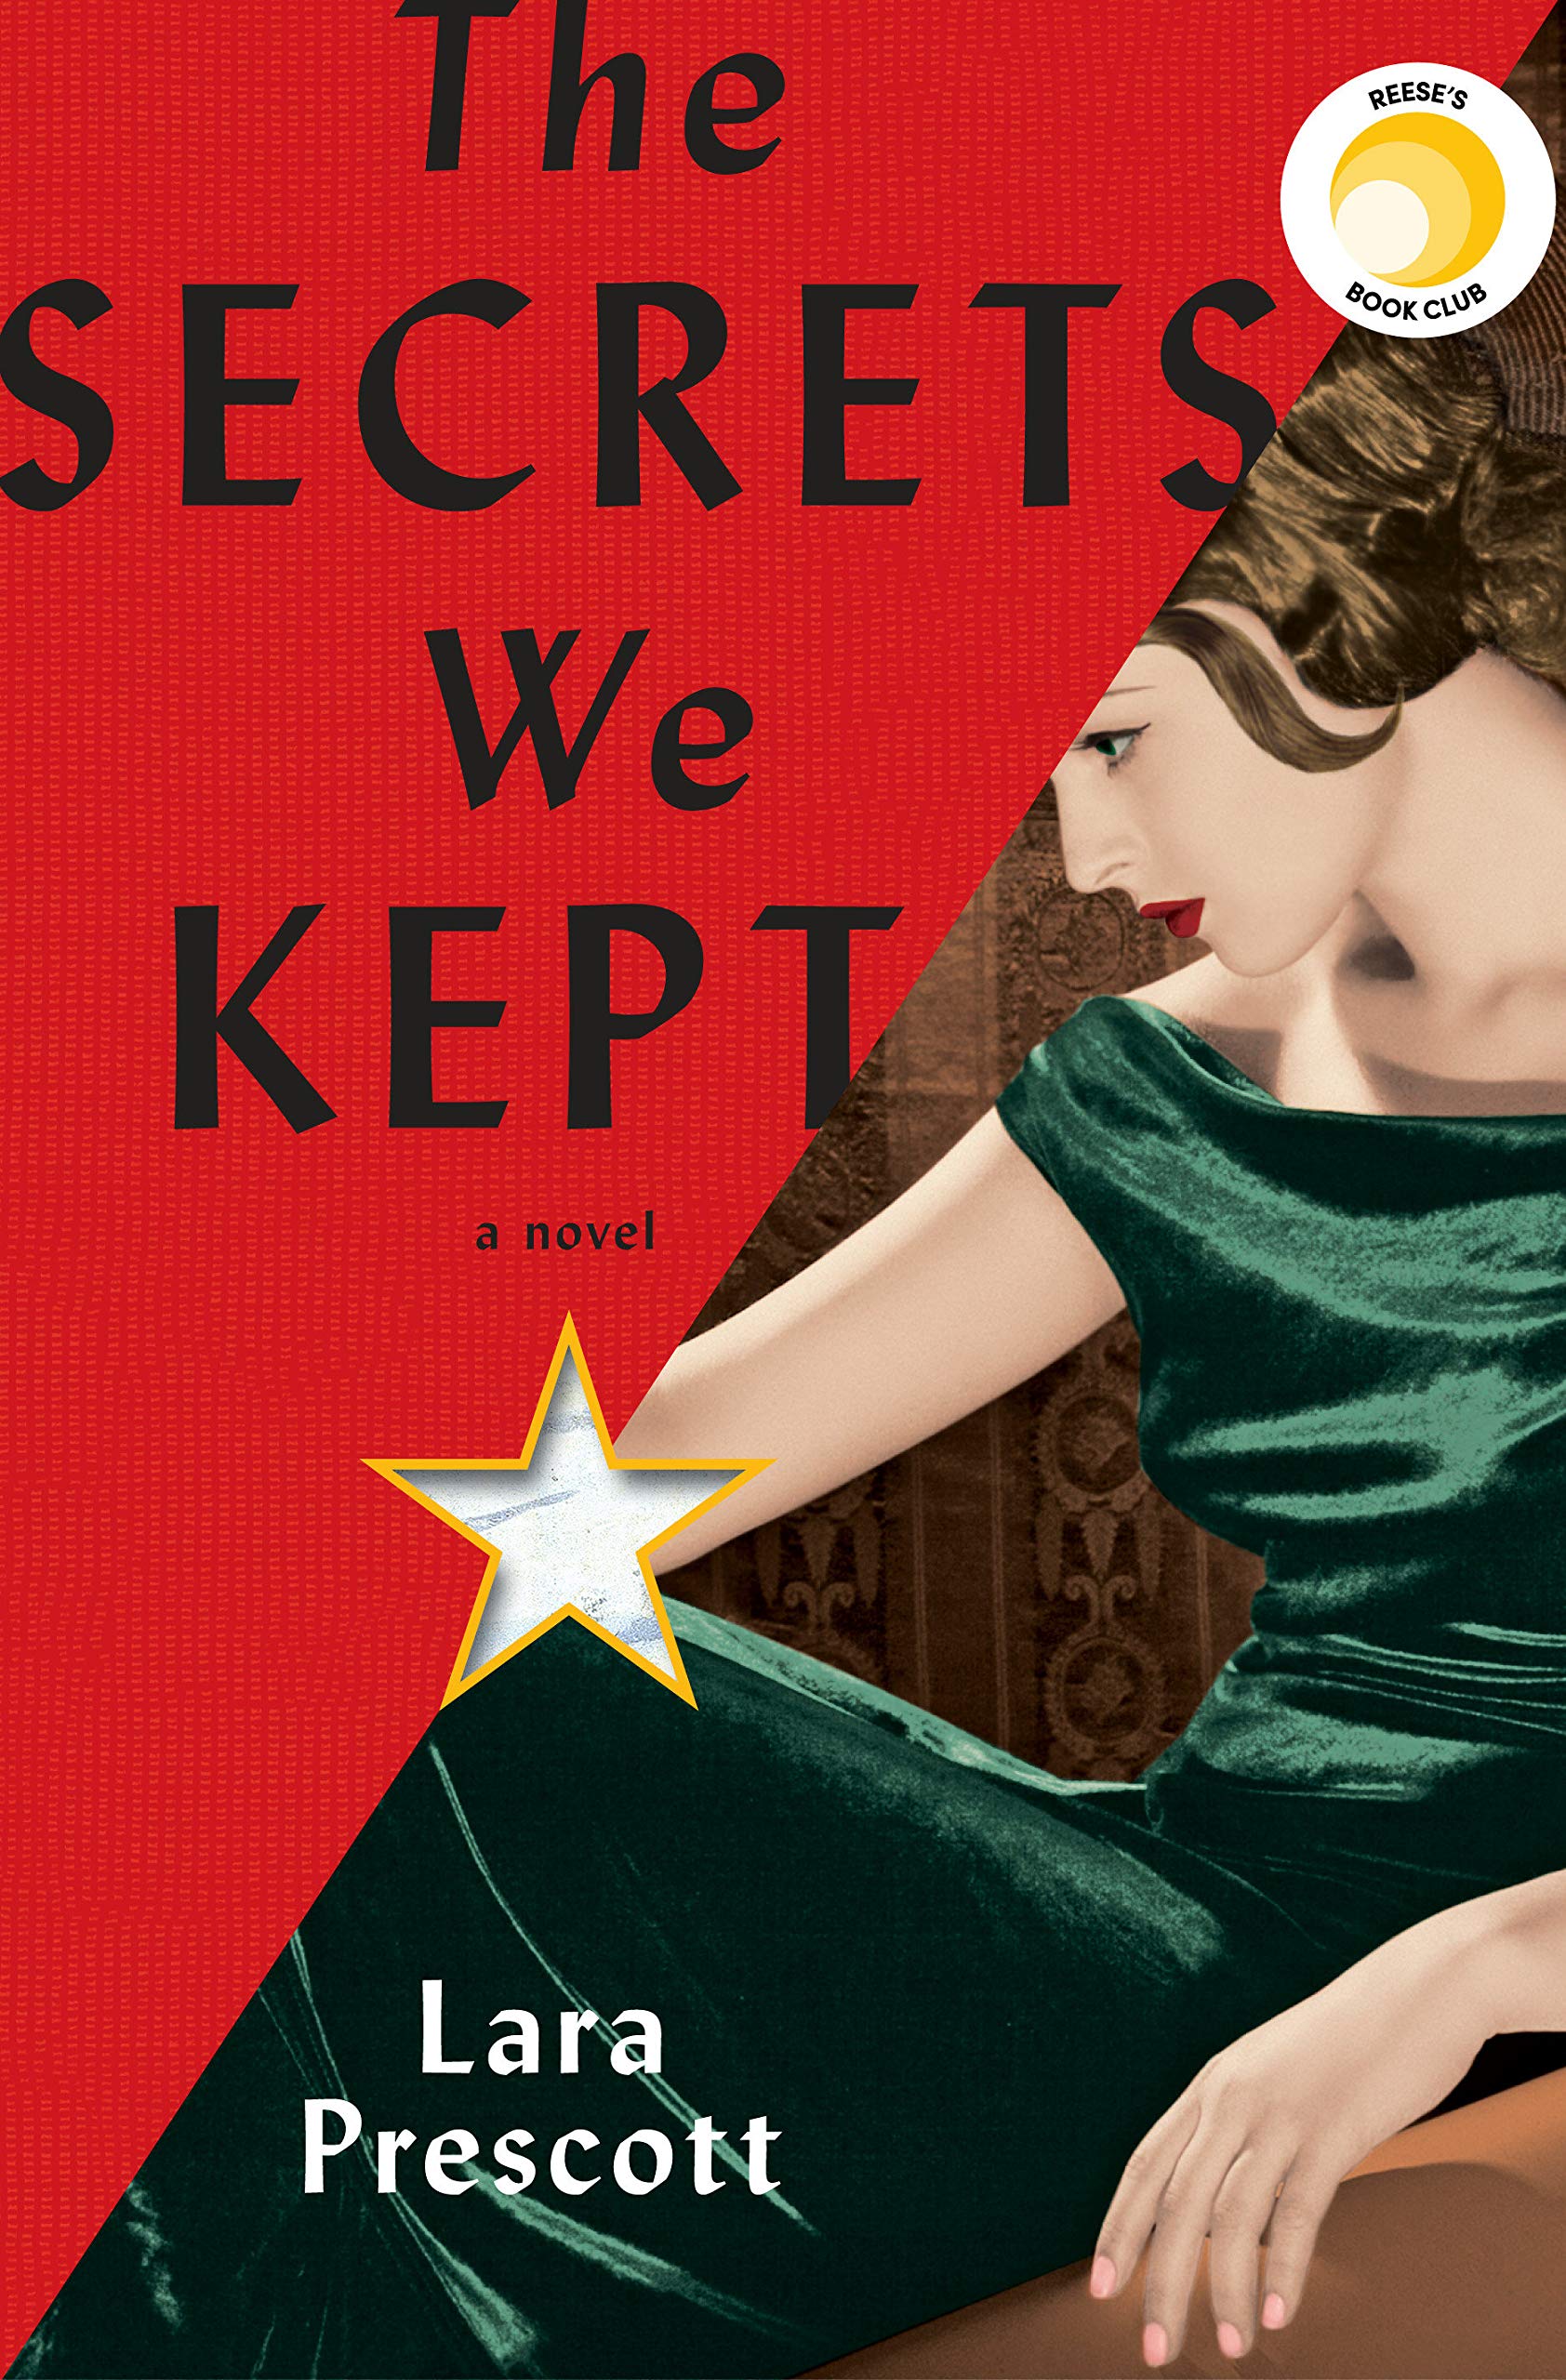 book cover of The Secrets We Kept. Woman in green dress on right, book title in black fond with red background on left.